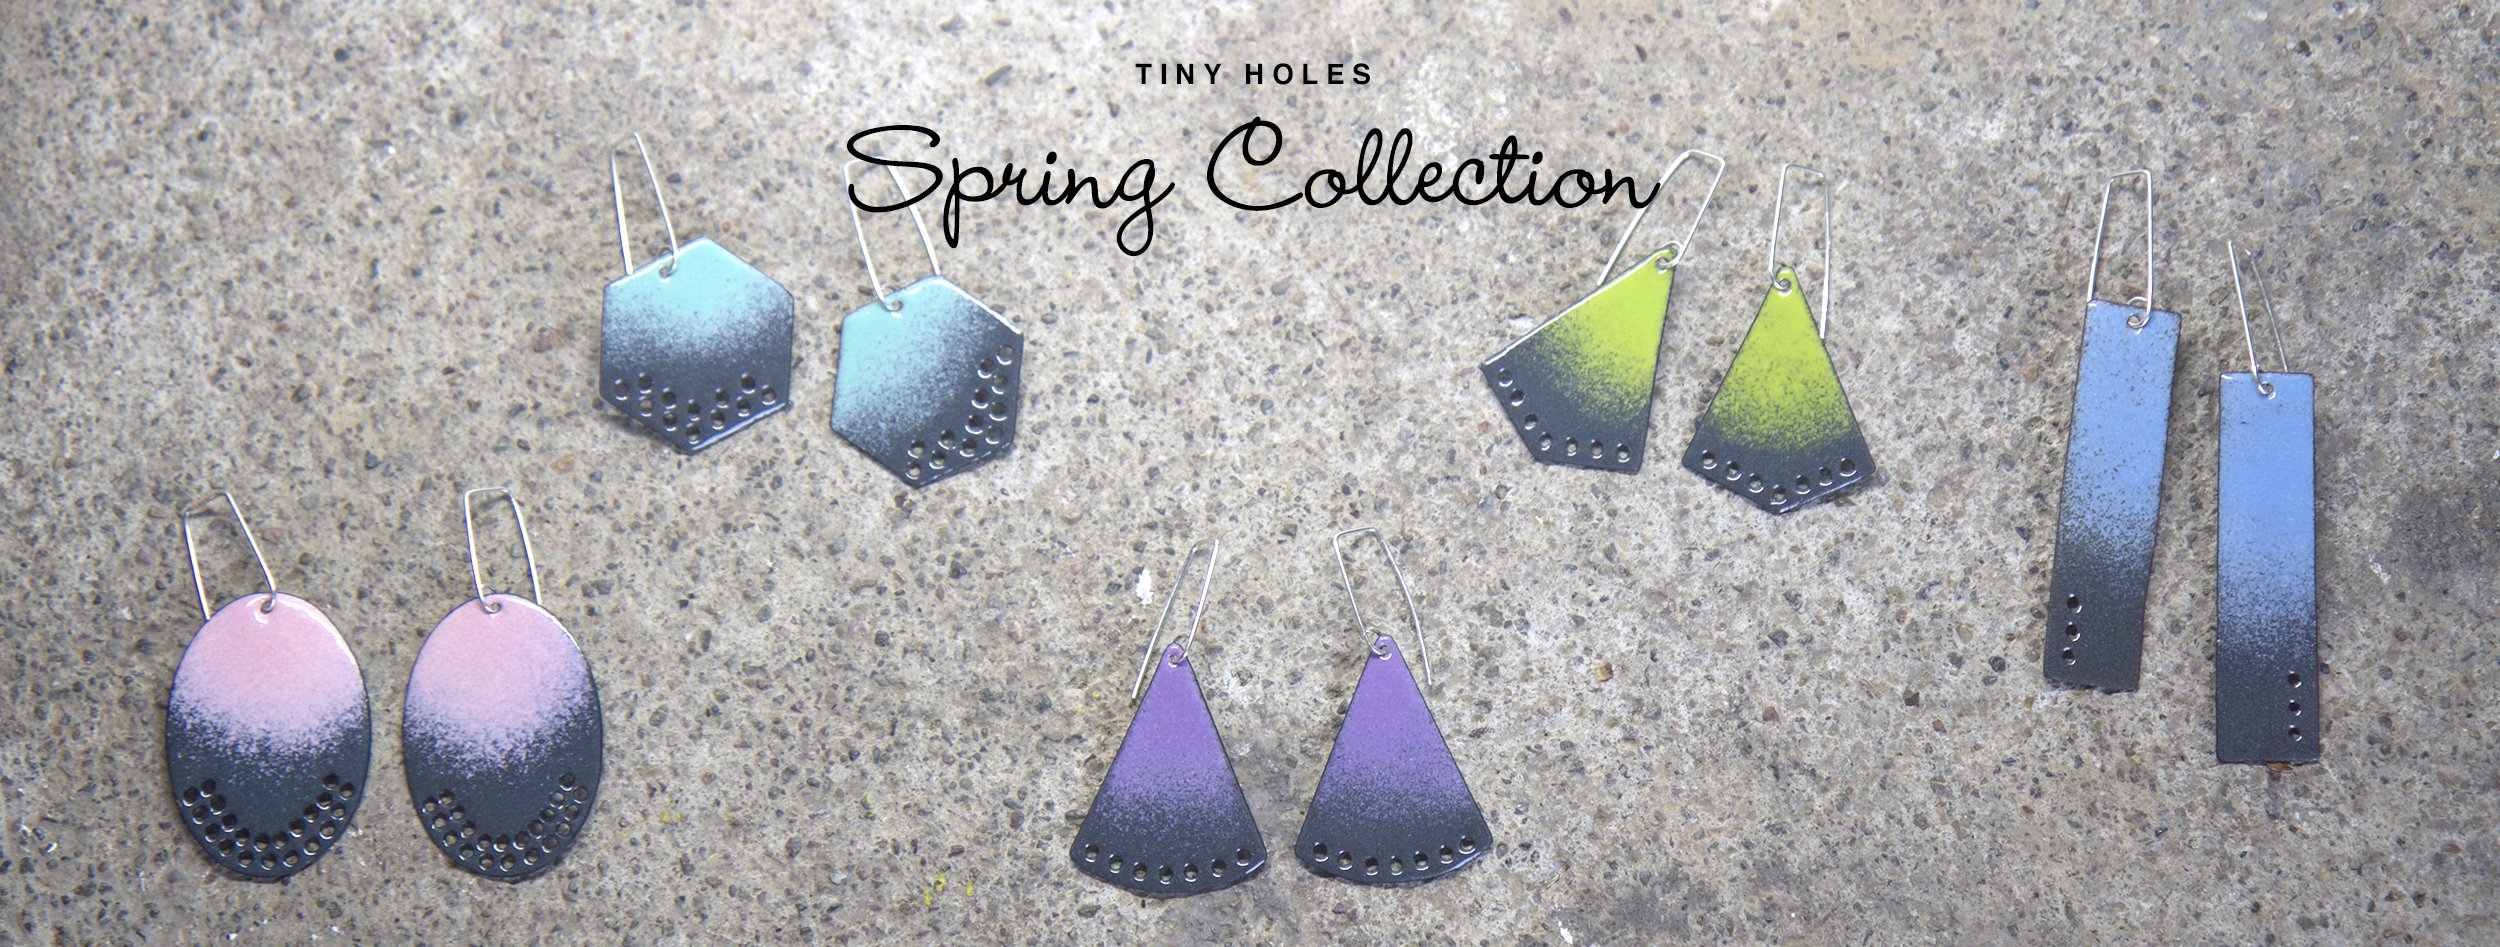 Tiny Holes Spring Collection.jpg